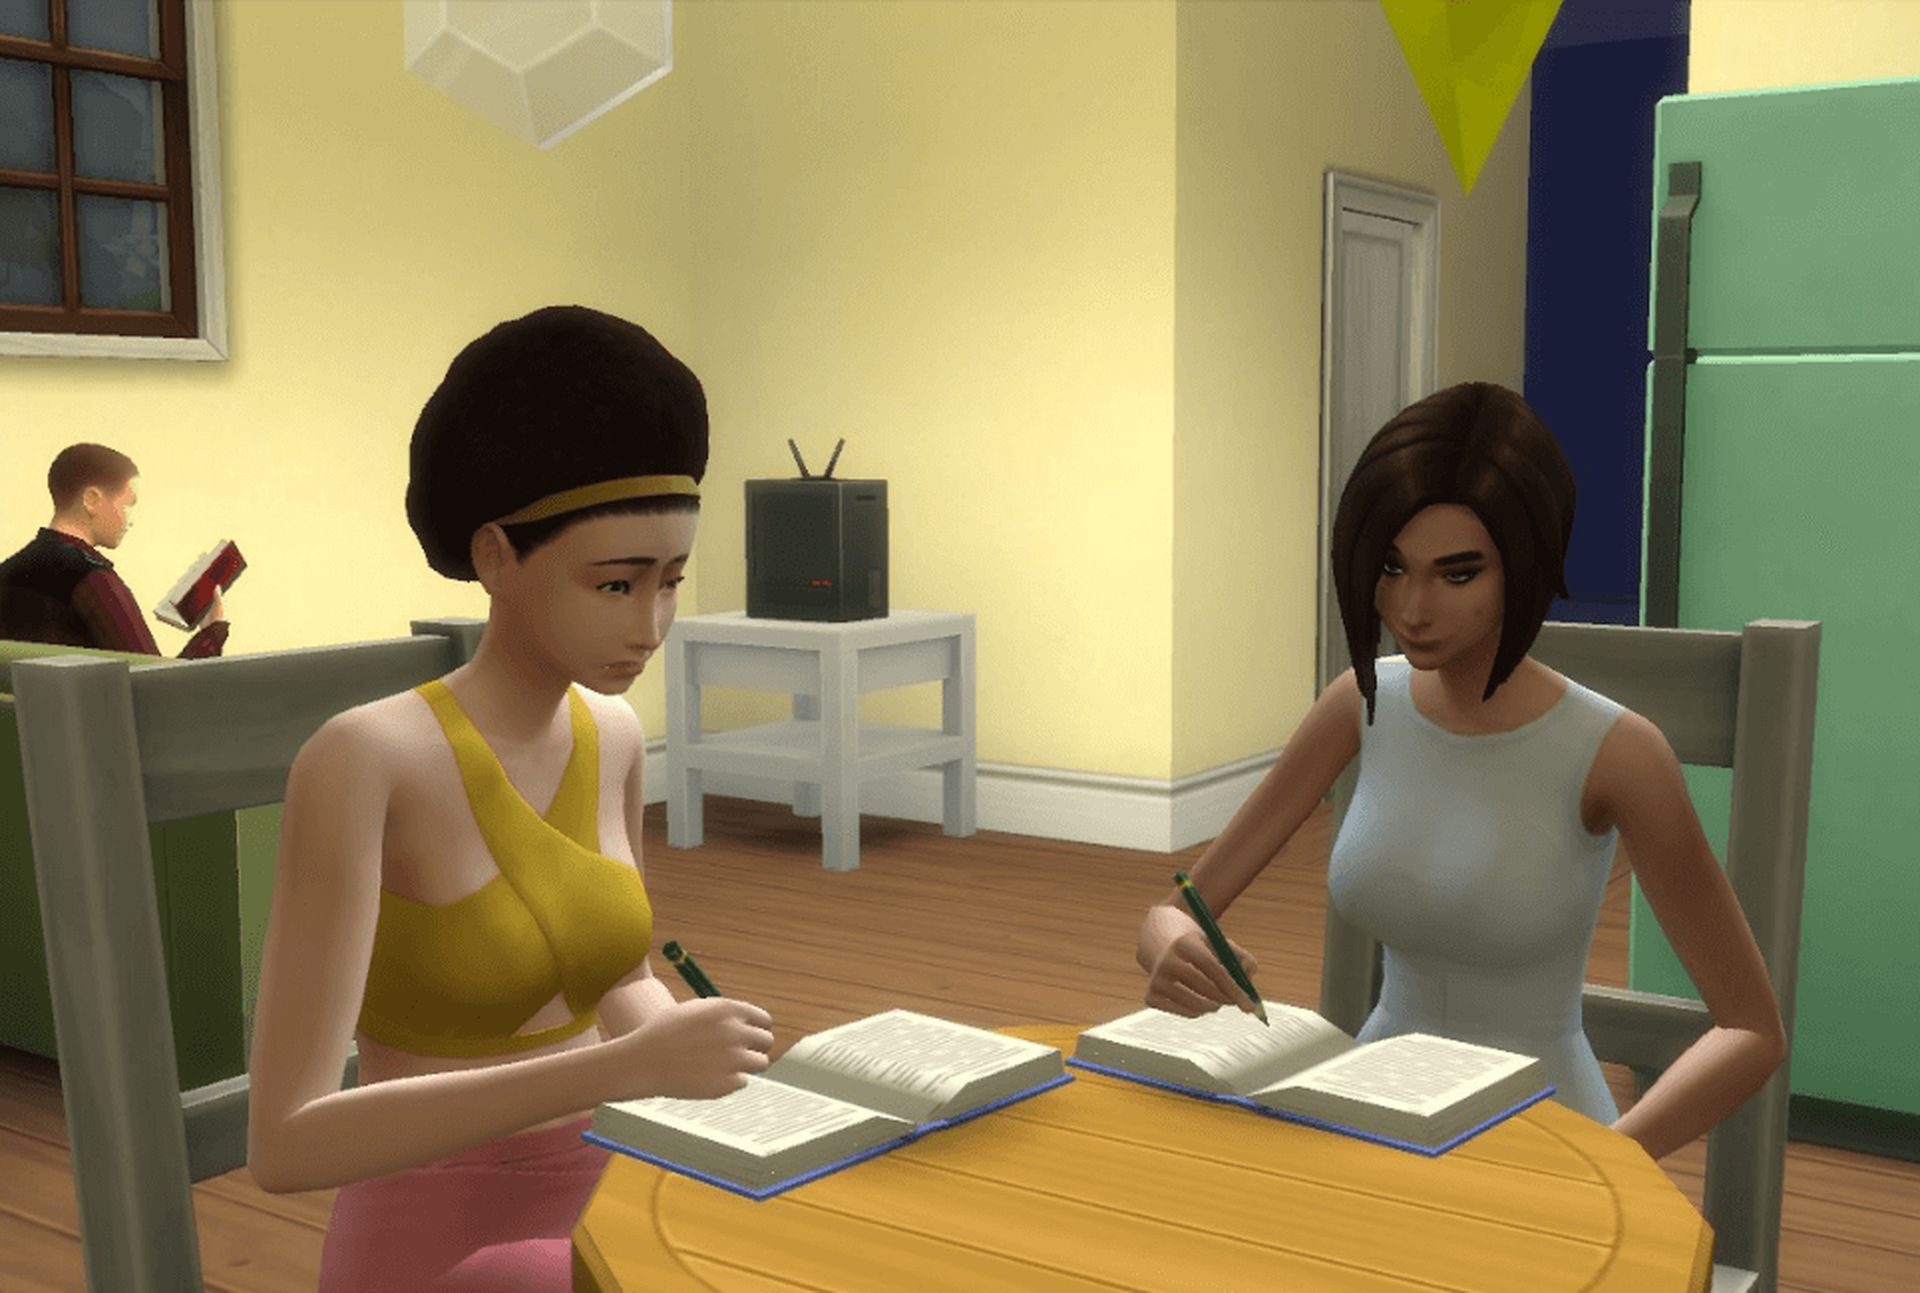 In this article, we are going to be going over how to do homework in Sims 4, so your Sim's grades won't suffer.